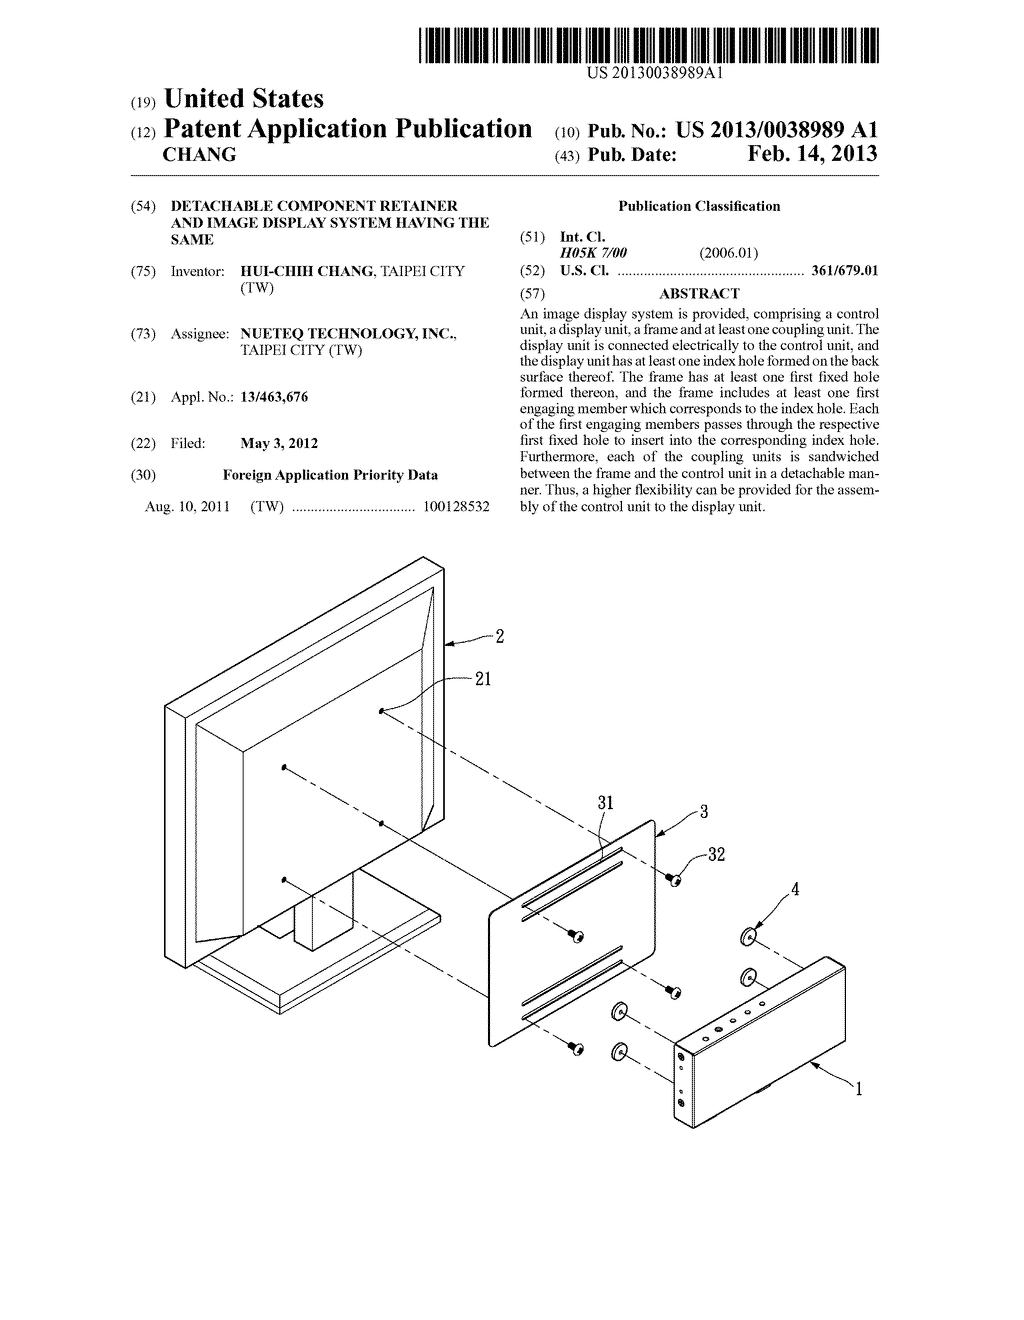 DETACHABLE COMPONENT RETAINER AND IMAGE DISPLAY SYSTEM HAVING THE SAME - diagram, schematic, and image 01